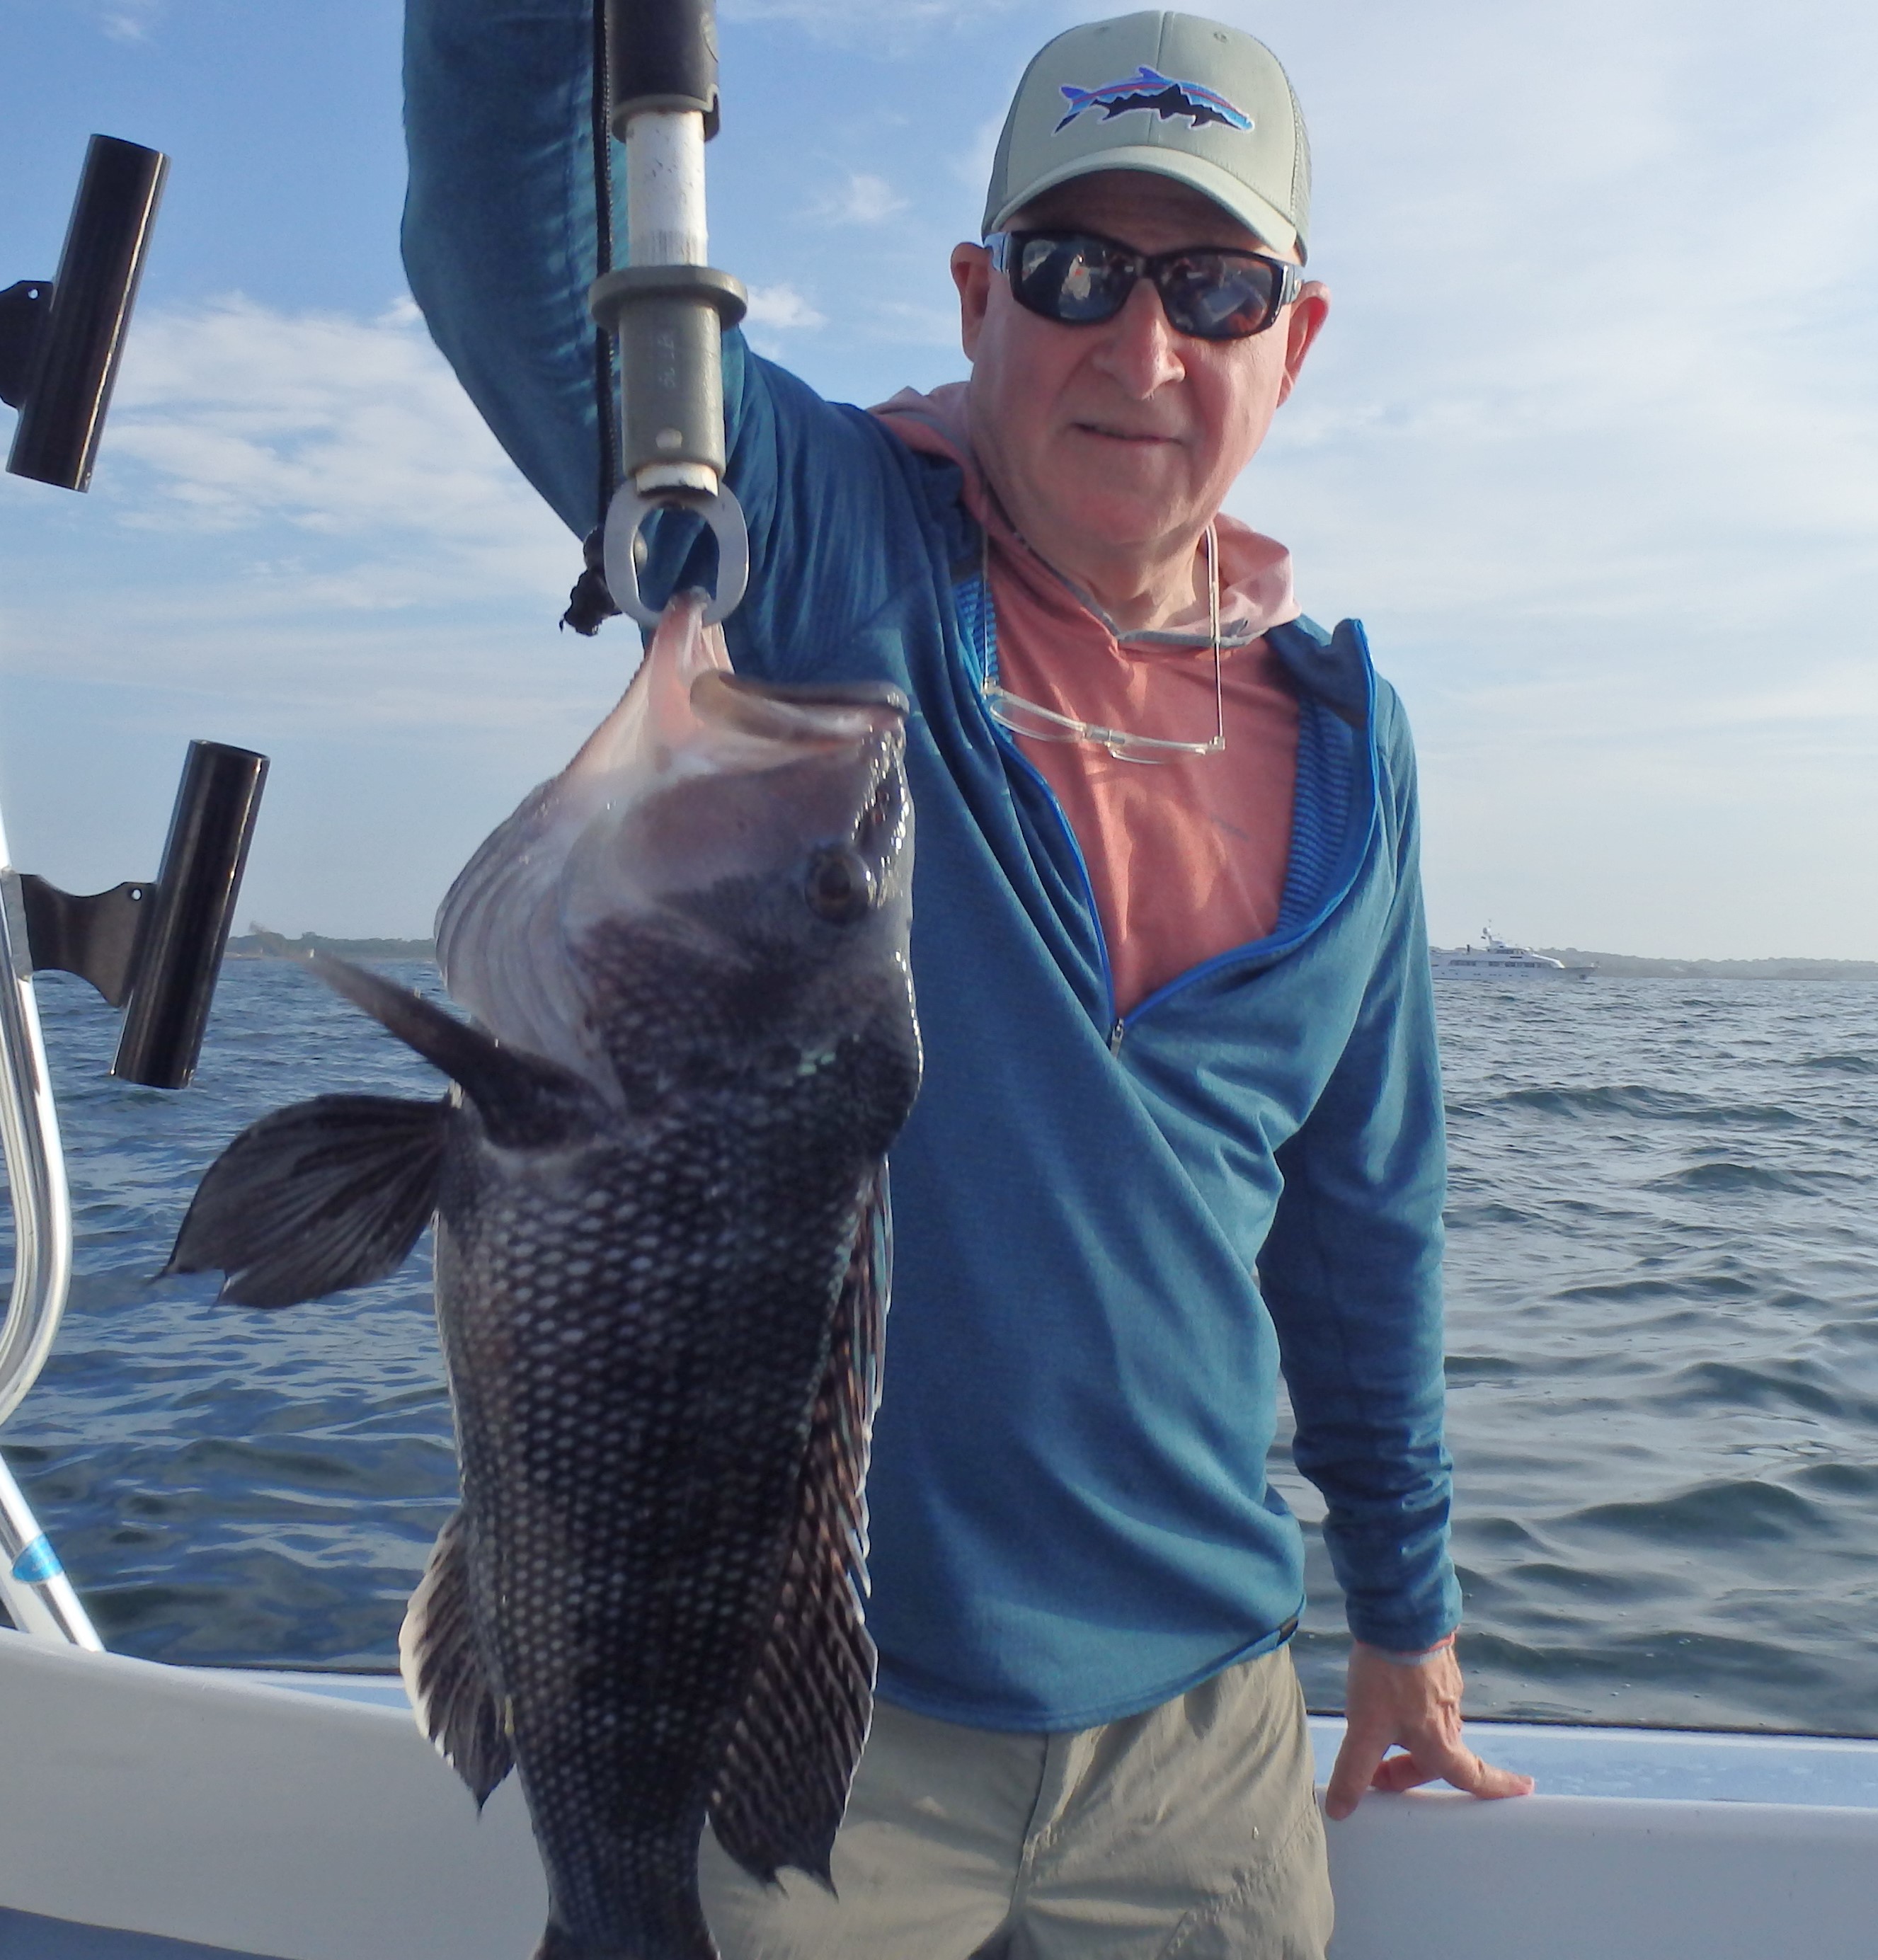 Tom Sadler, deputy director of the Marine Fish Conservation Network, with a 20” black sea bass he caught off Newport, RI. Black sea bass are plentiful in the northeast in part due to climate change.